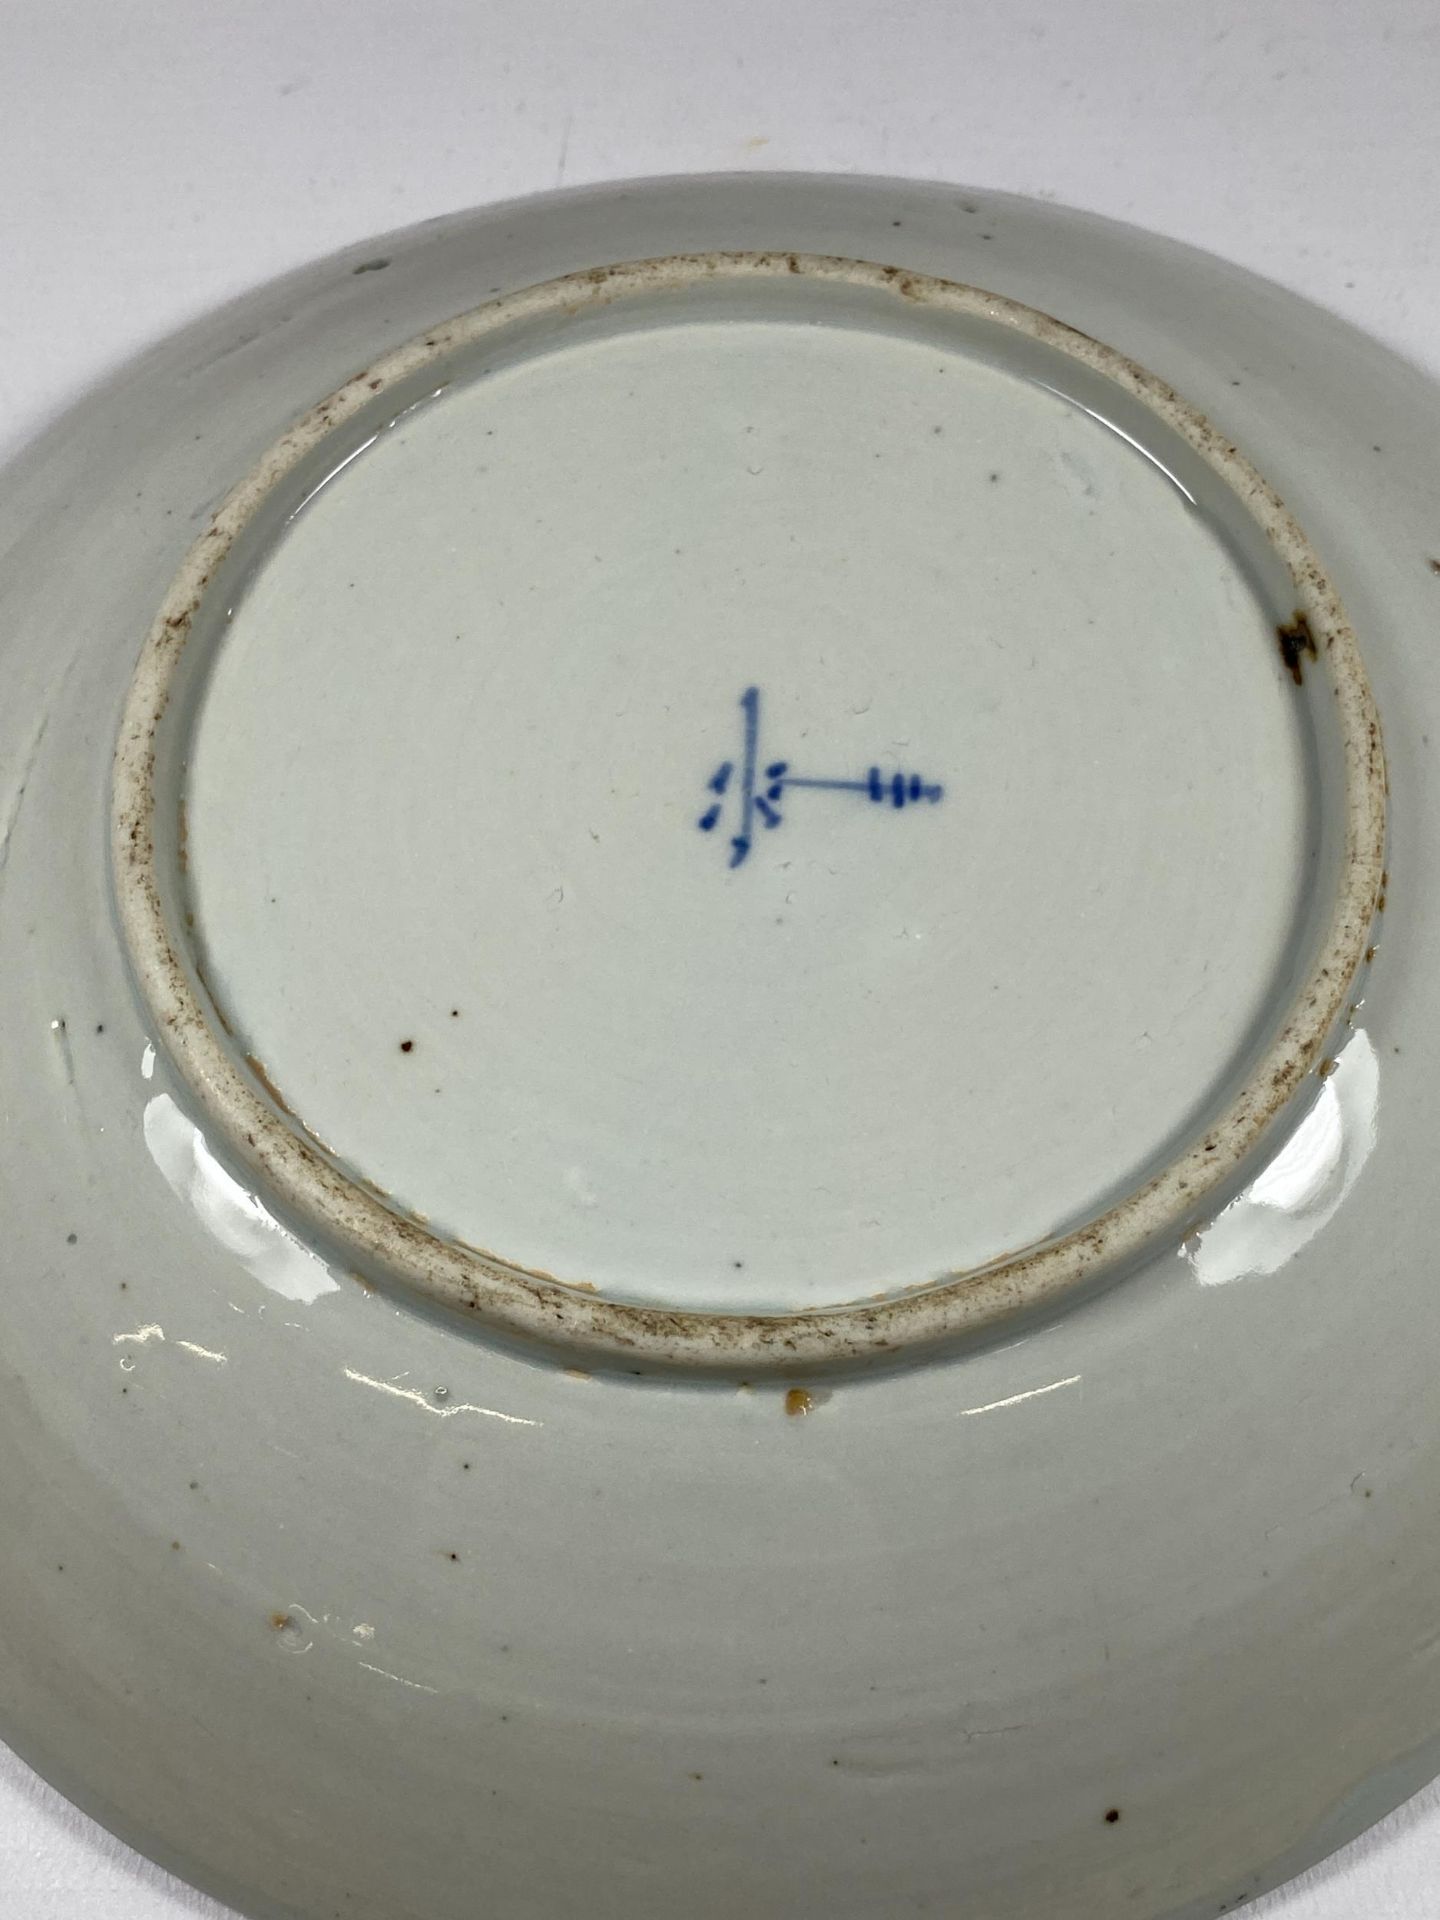 A LATE 19TH / EARLY 20TH CENTURY CHINESE PORCELAIN FISH DESIGN PLATE, MARKS TO BASE, DIAMETER 21.5CM - Image 4 of 4